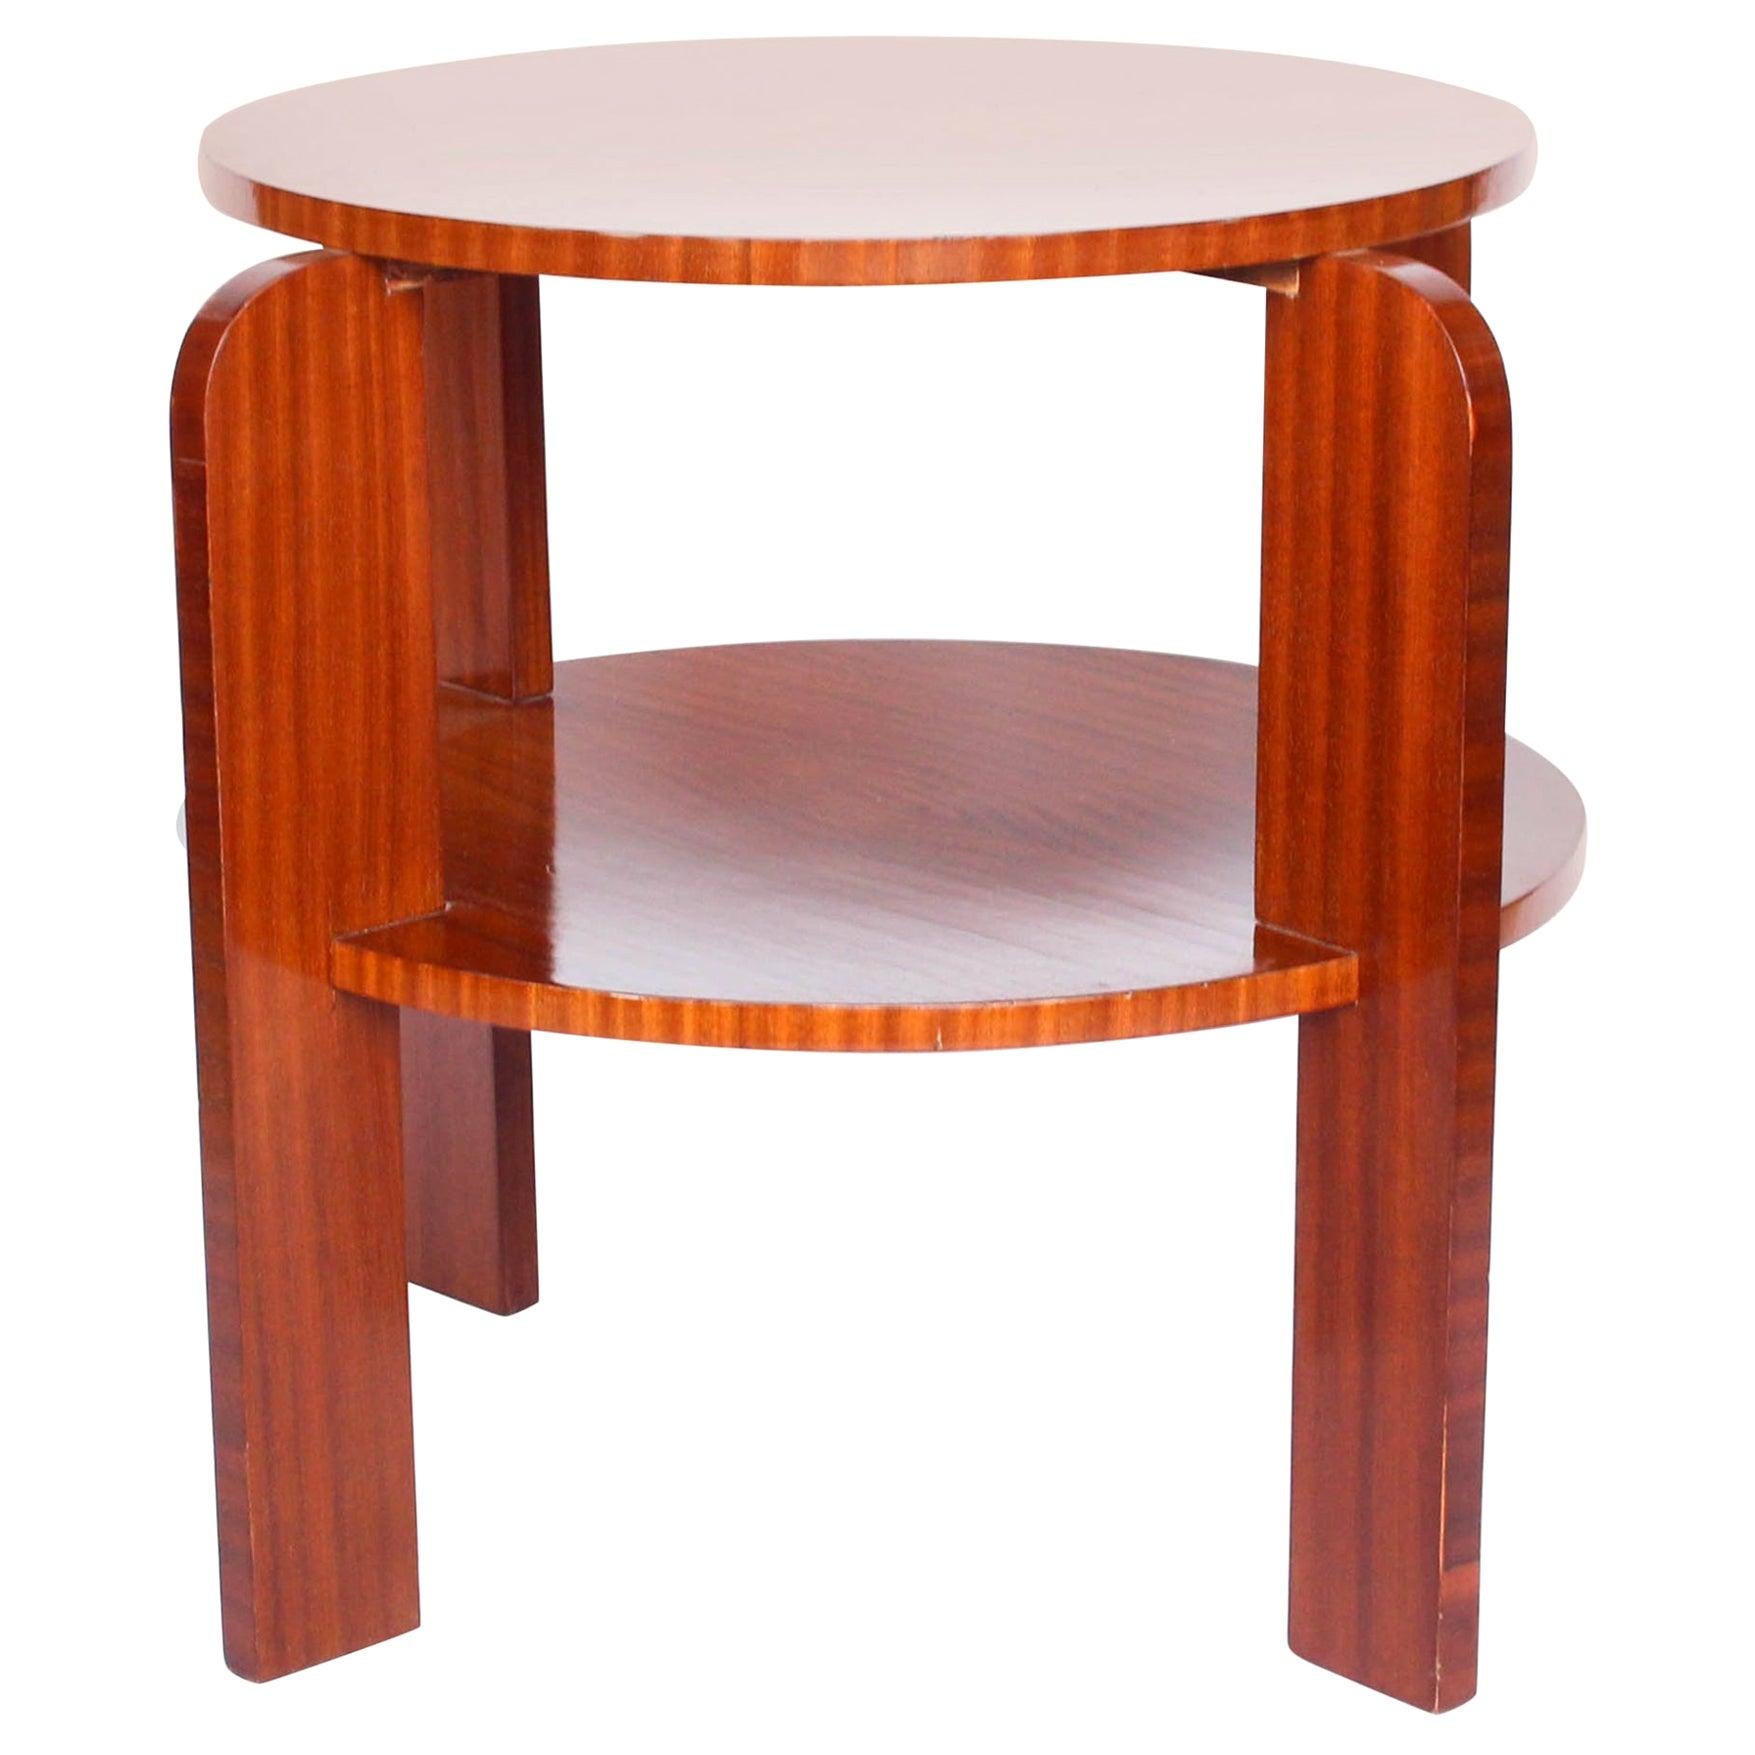 Art Deco Two-Tiered Solid Pine Side Table with Striped Mahogany, French, 1930s For Sale